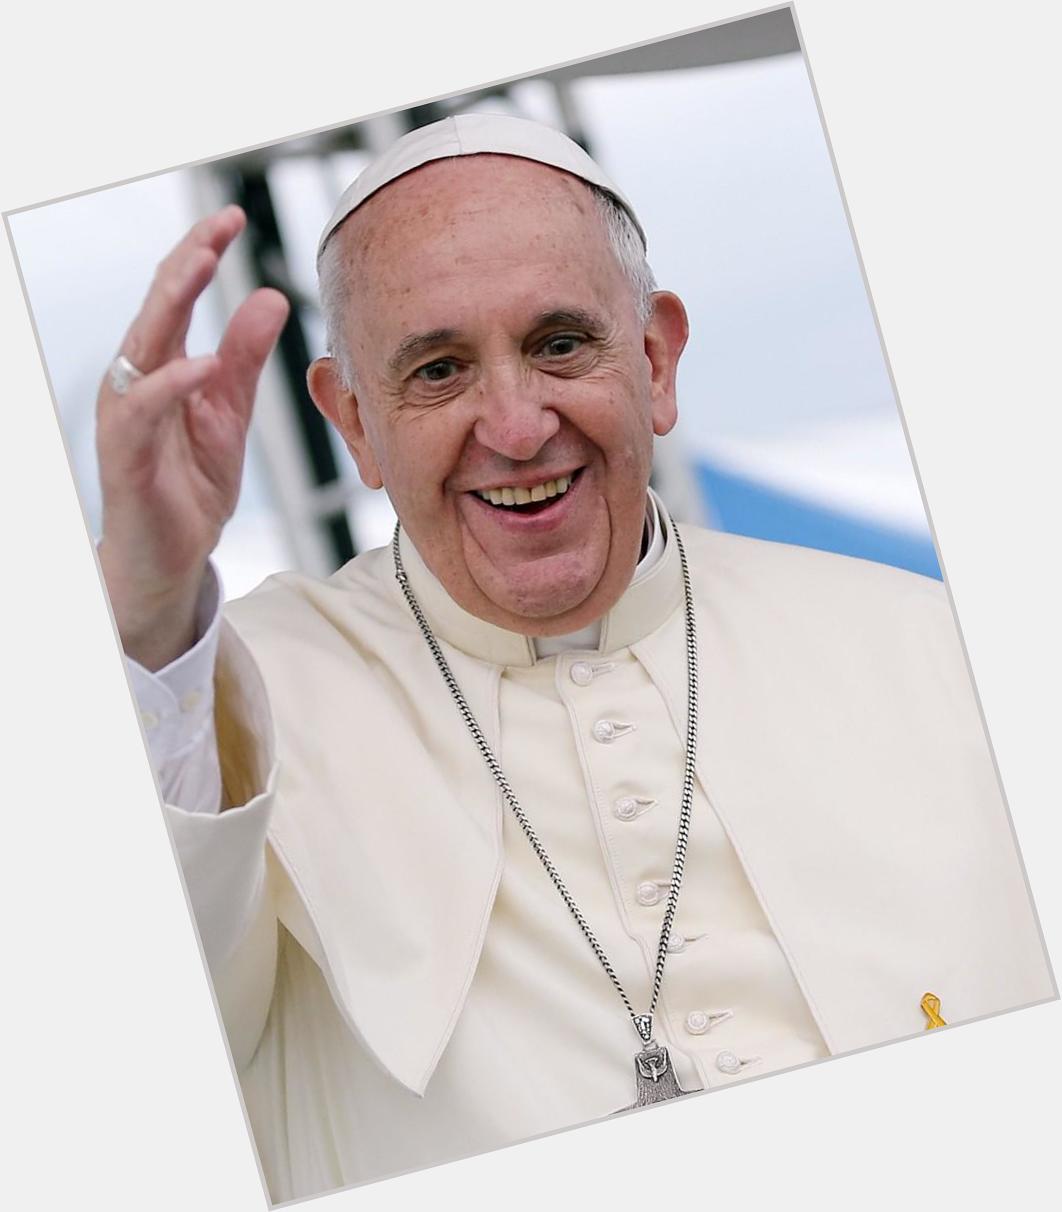  Happy Birthday Pope Francis who is 78 today. 